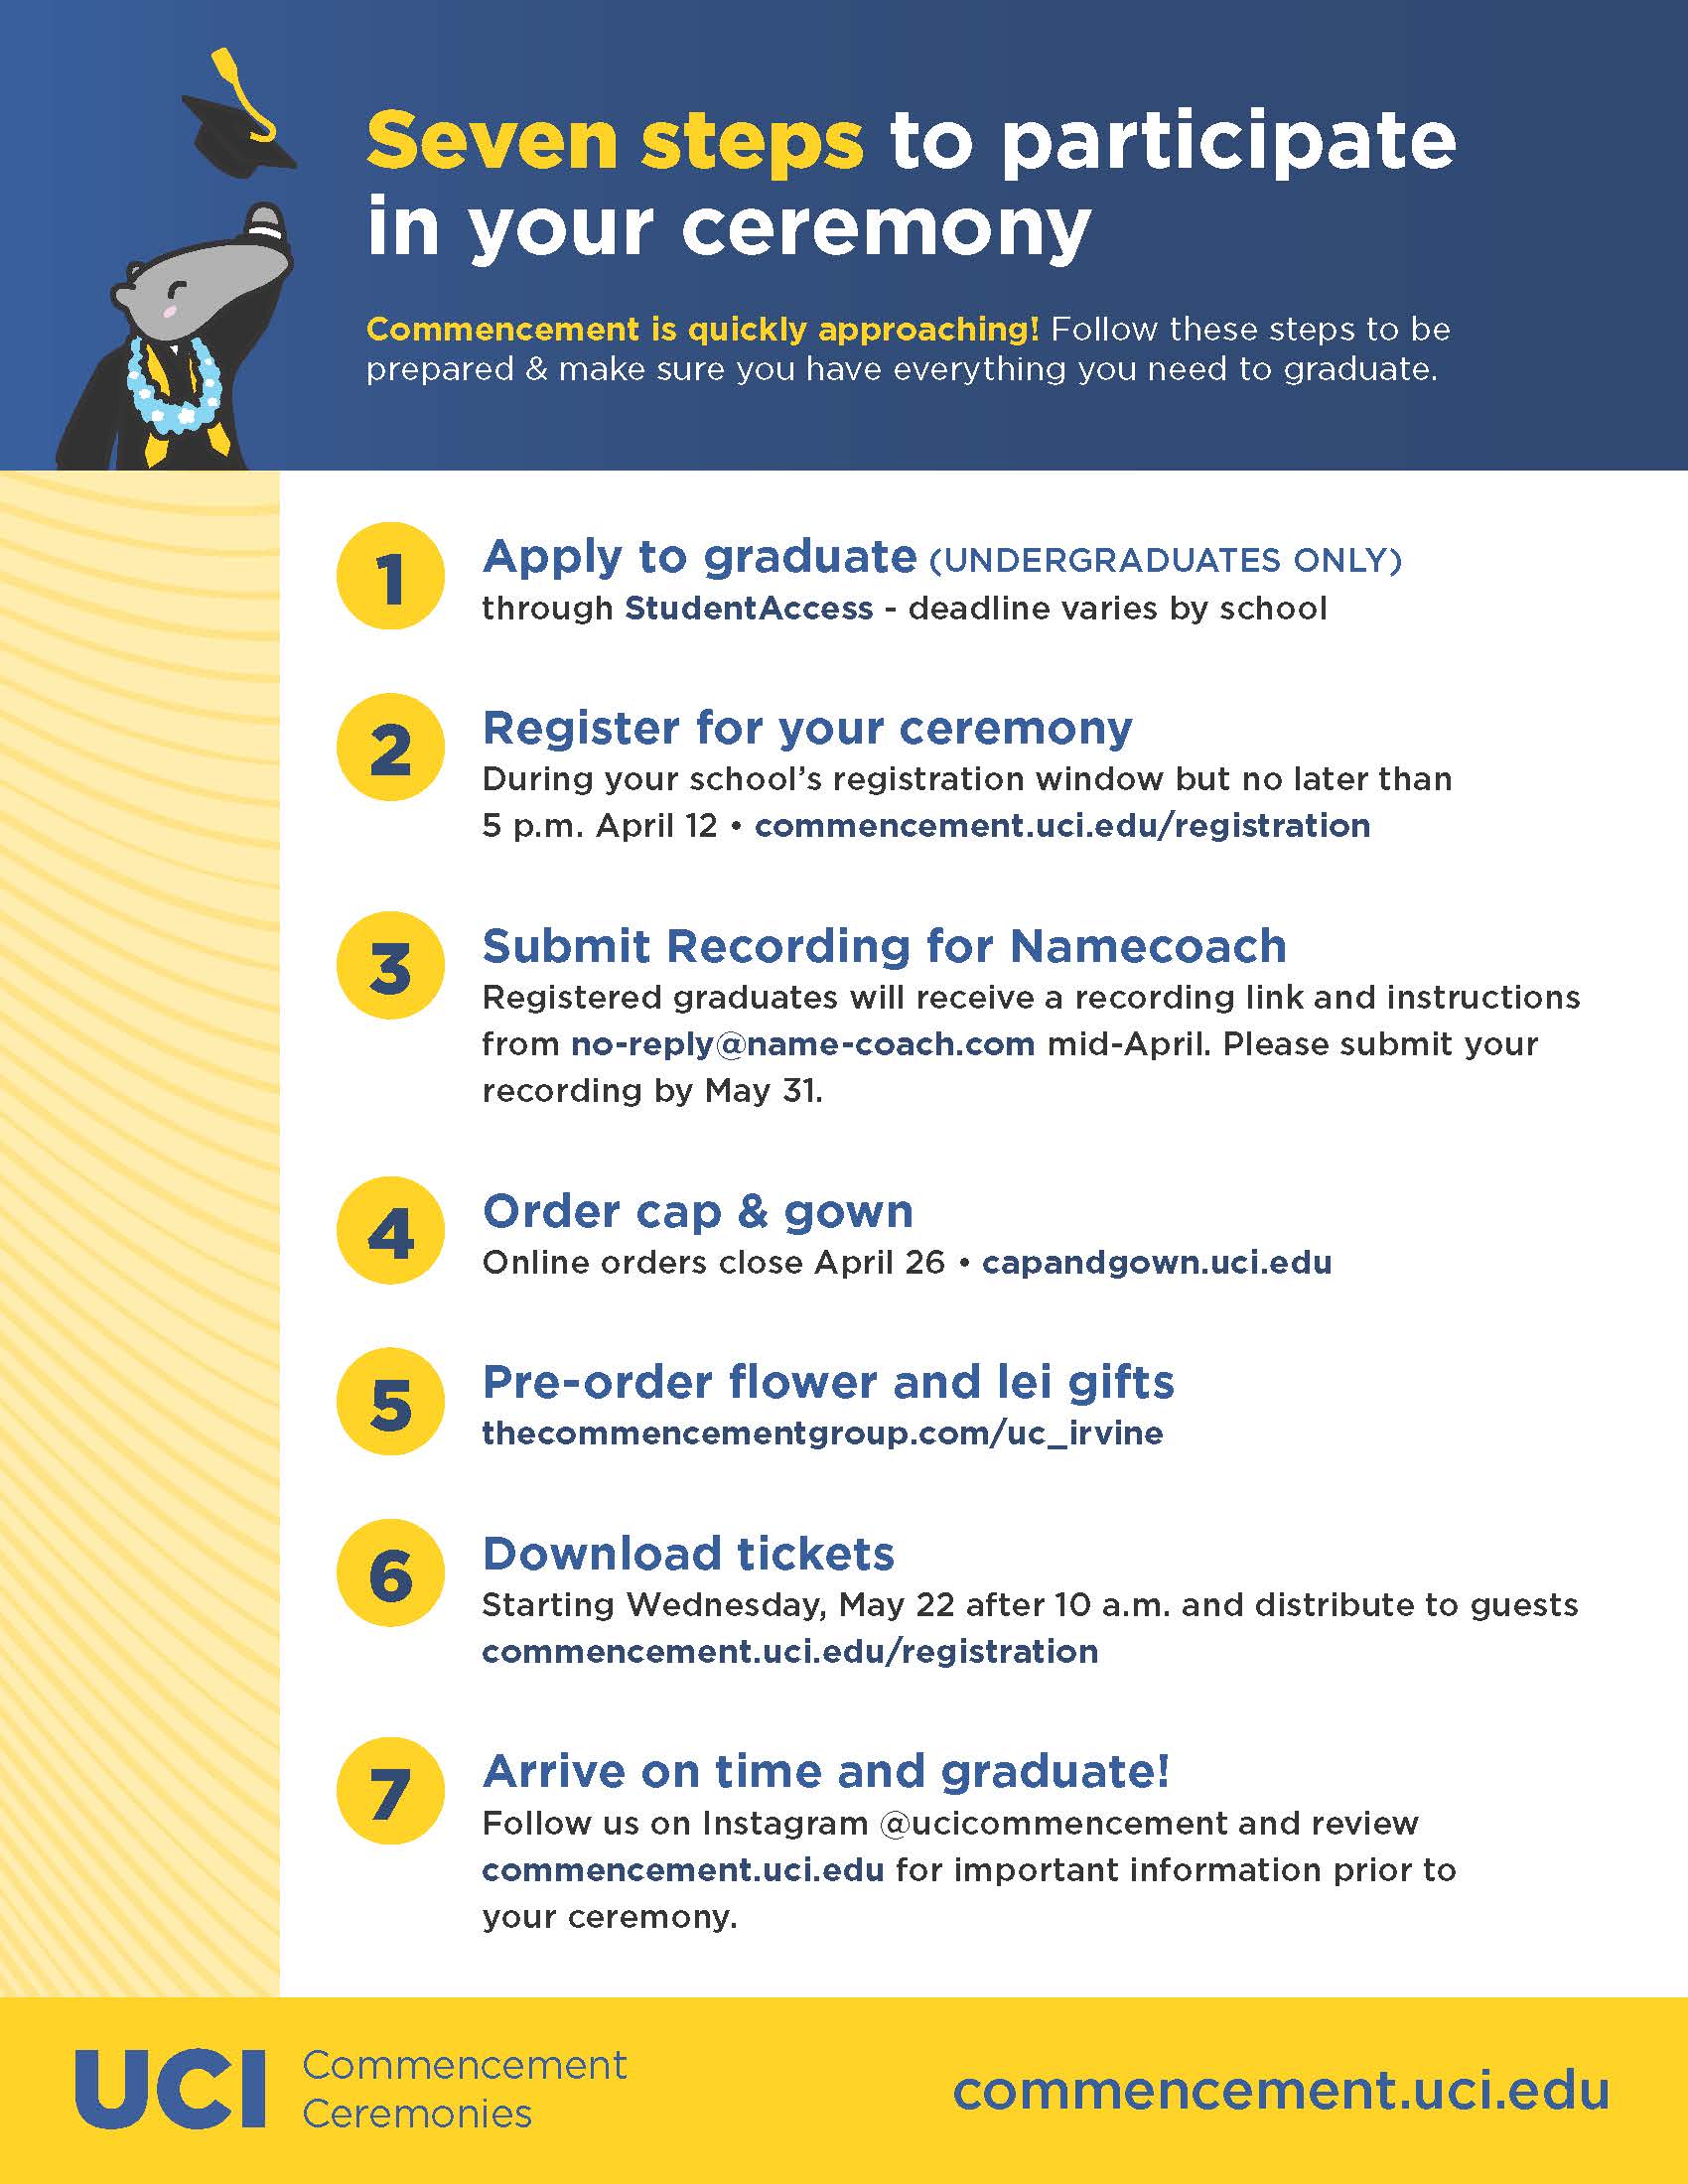 Seven steps to participate in your Commencement Ceremony